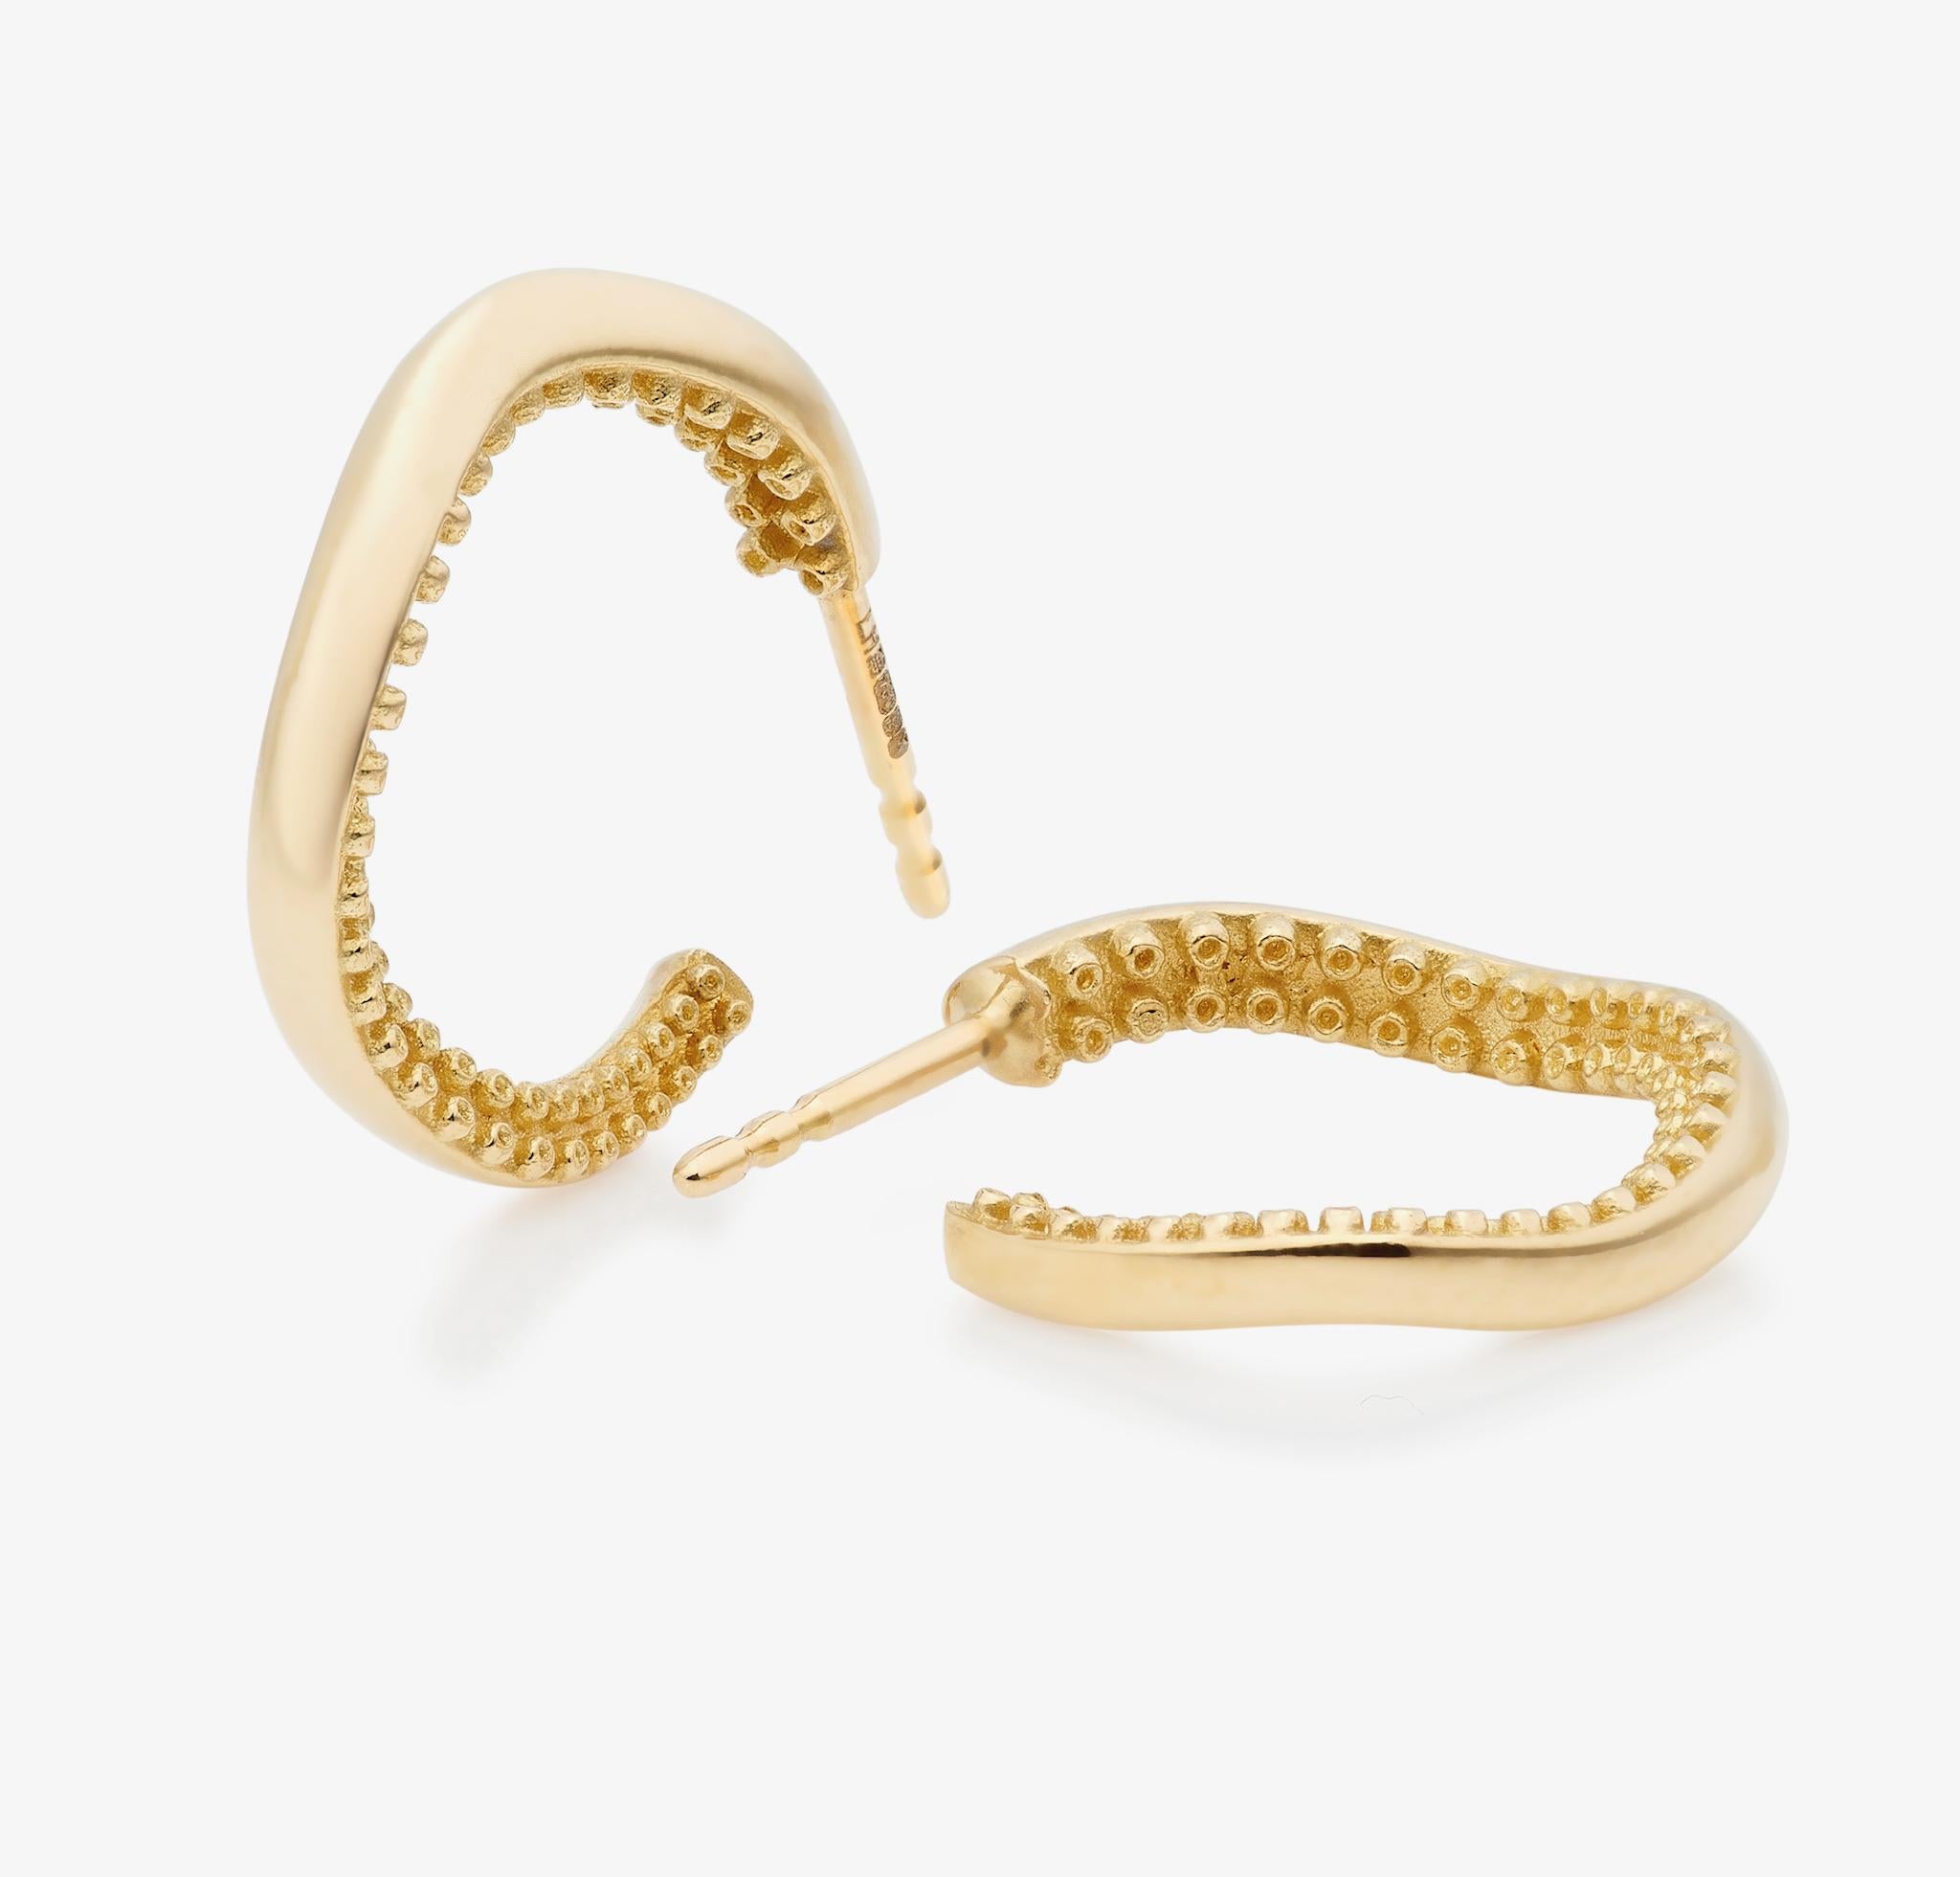 Lilly Hastedt Octopus Gold Hoop Earrings In New Condition For Sale In London, GB